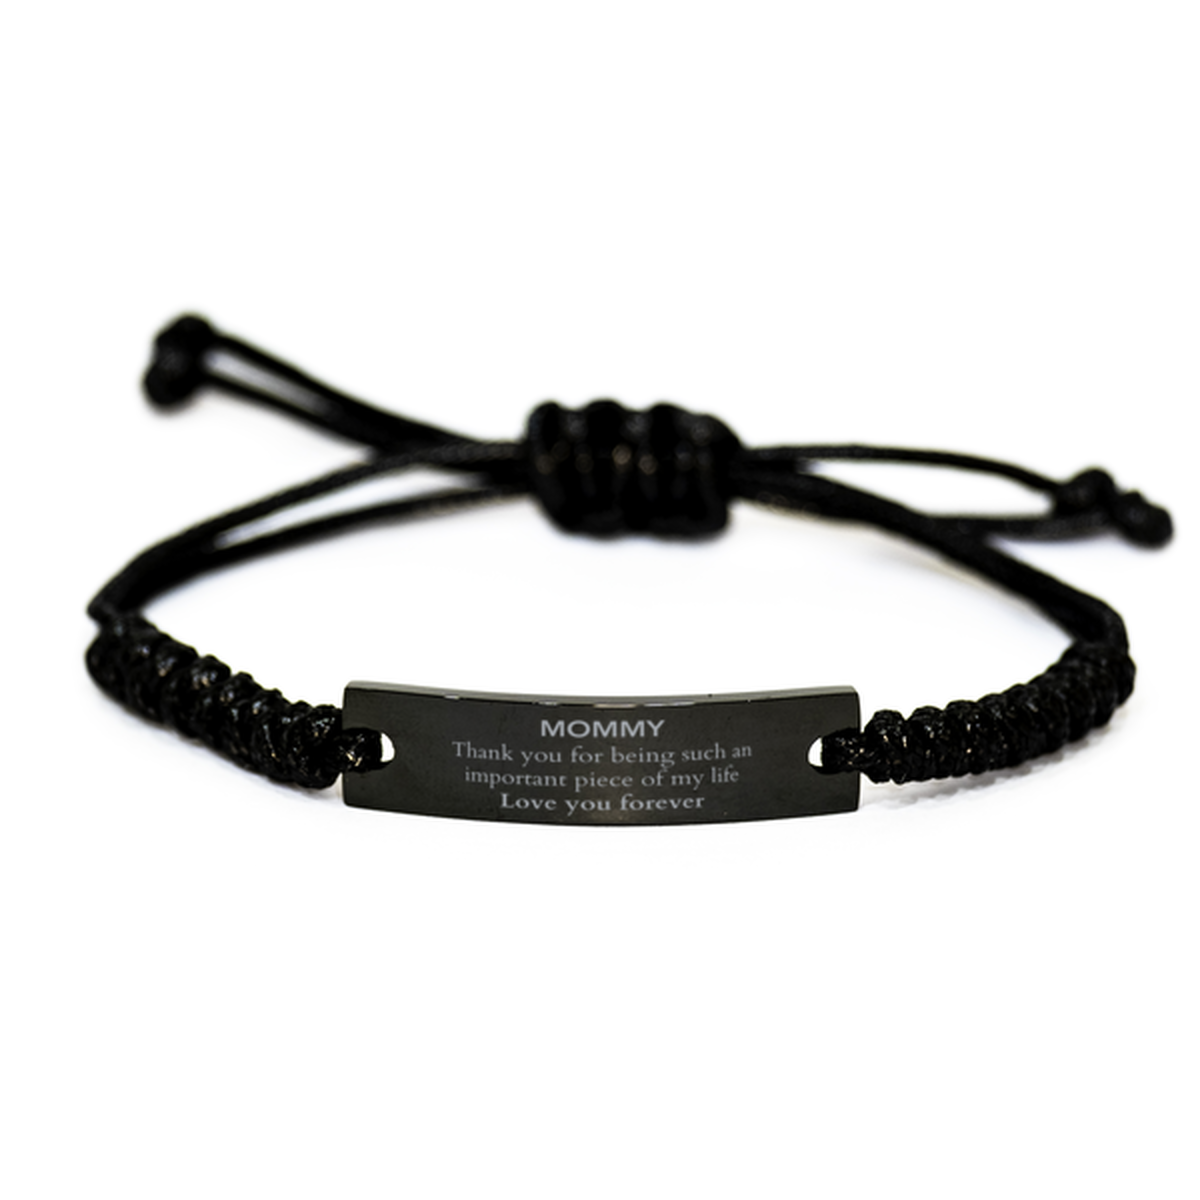 Appropriate Mommy Black Rope Bracelet Epic Birthday Gifts for Mommy Thank you for being such an important piece of my life Mommy Christmas Mothers Fathers Day